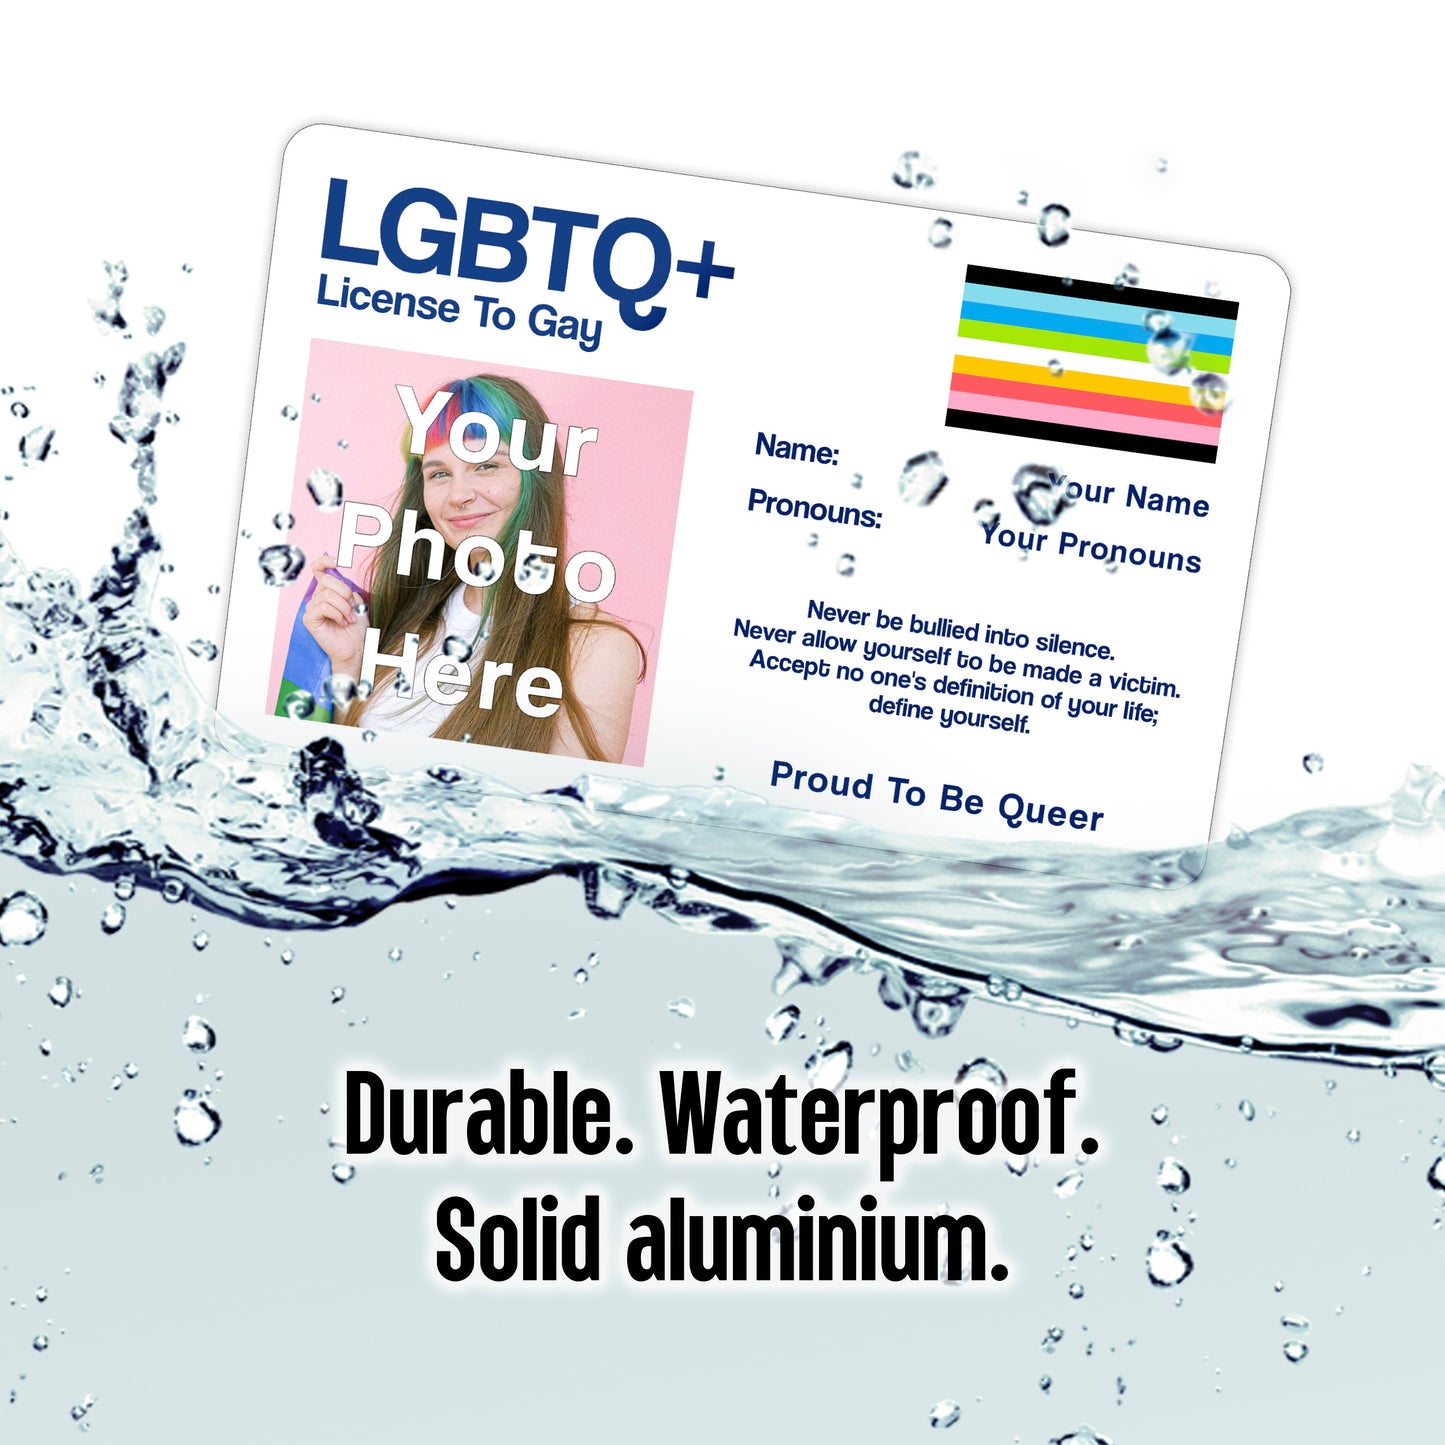 Queer Pride License To Gay aluminium wallet card personalised with your name, pronouns, and photo